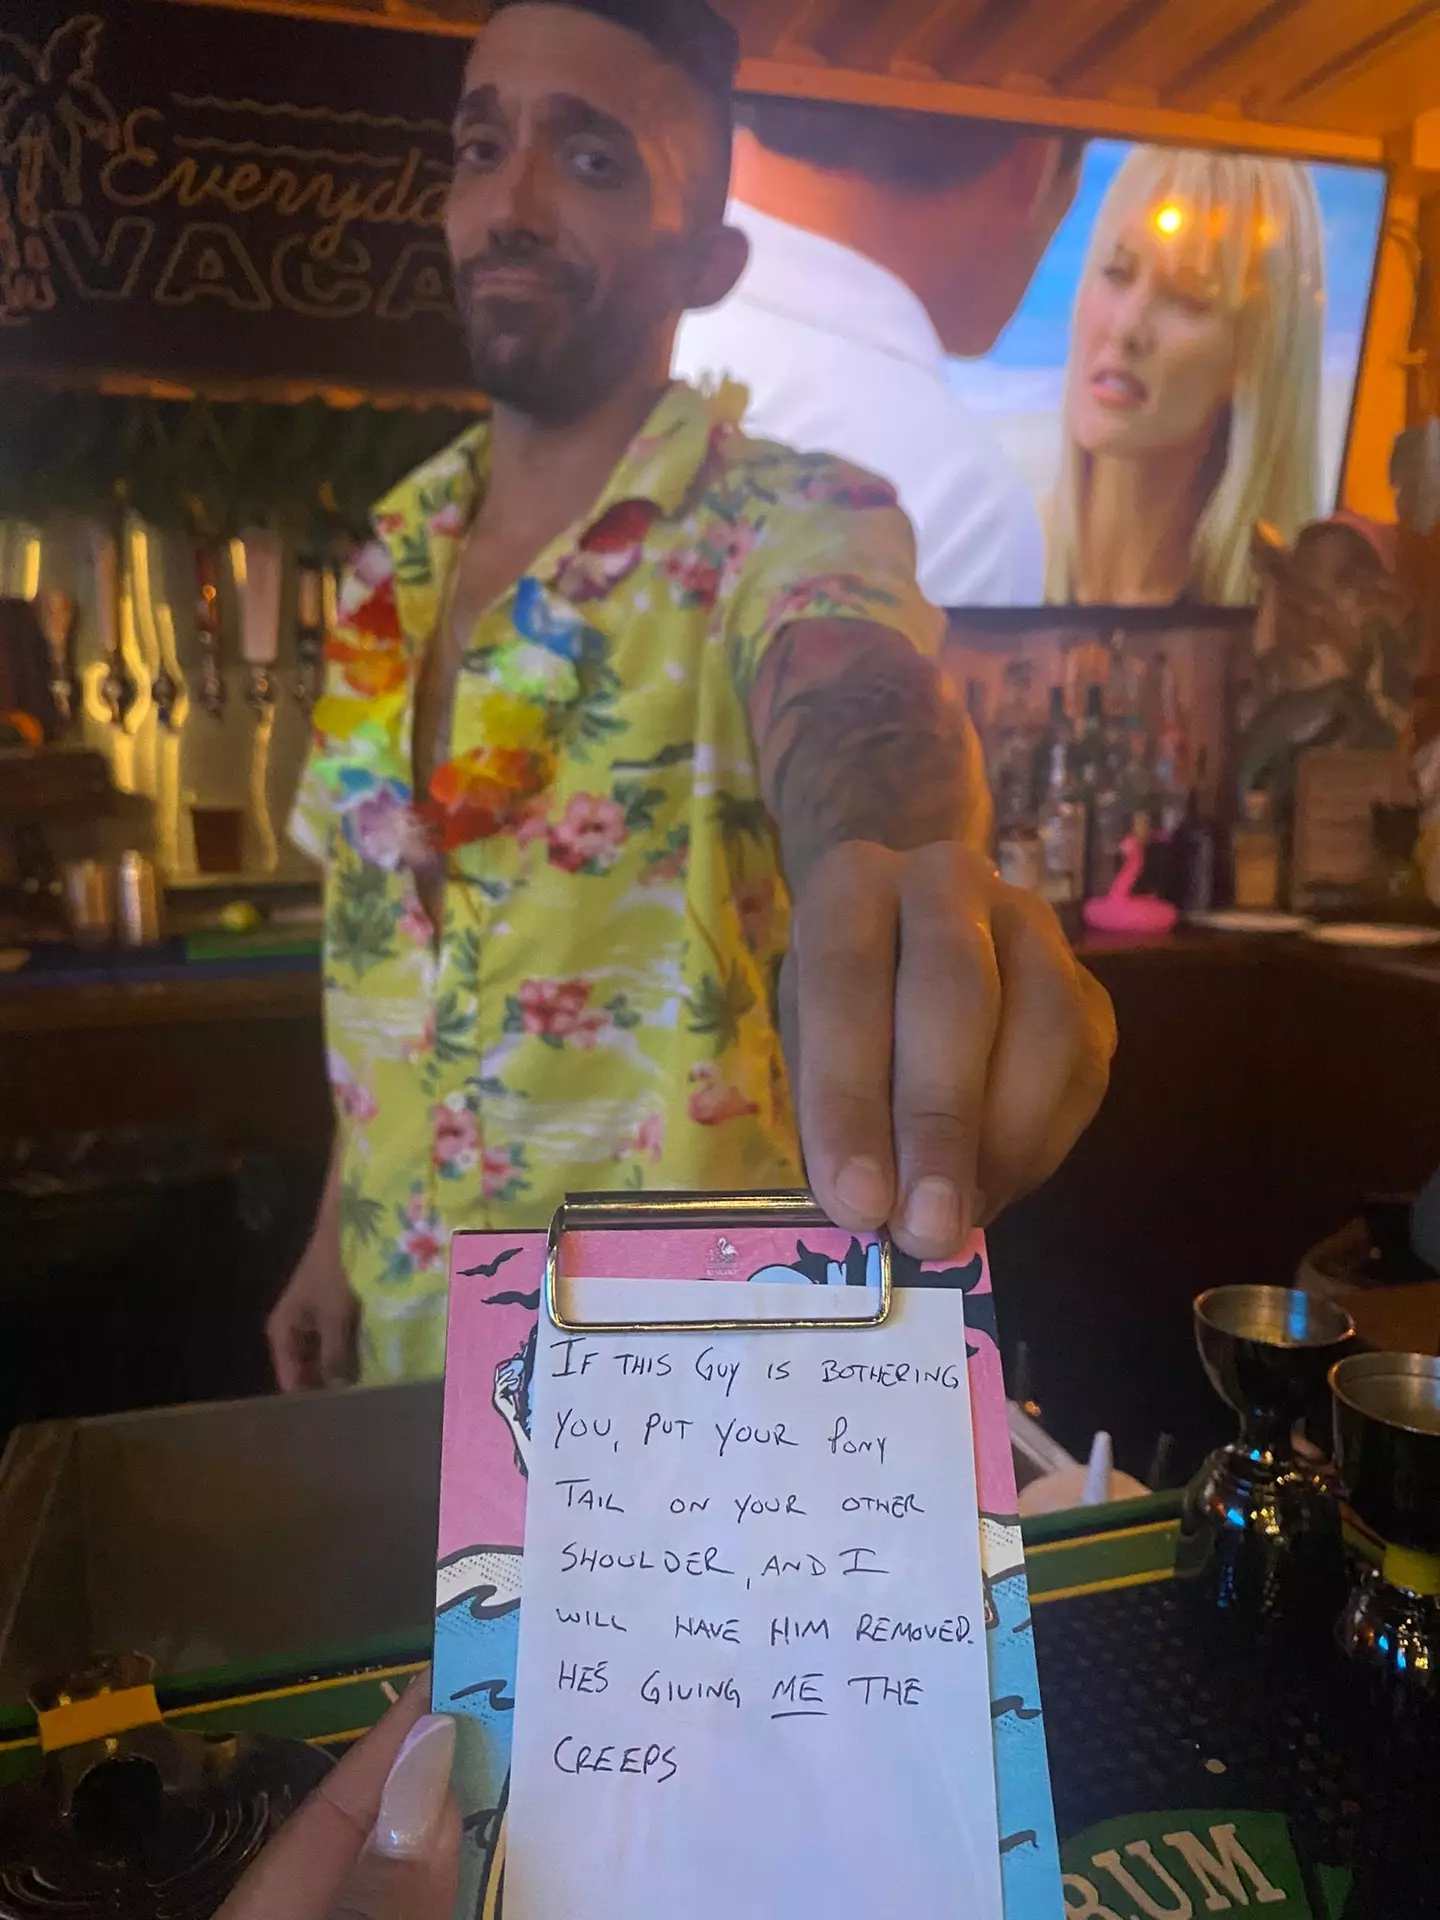 This bartender is a certified legend.